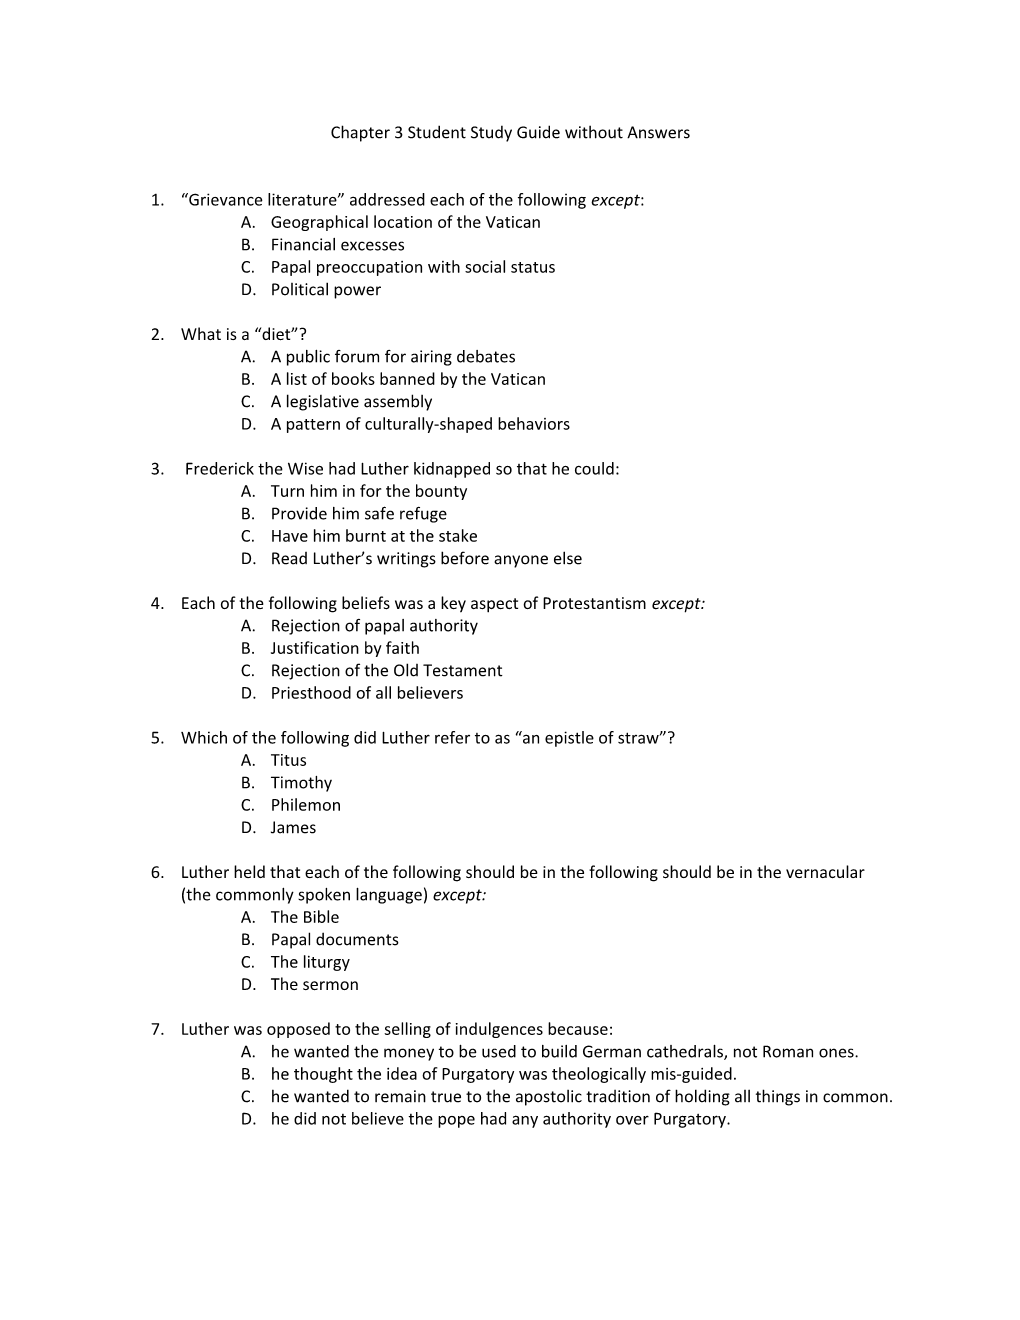 Chapter 3 Student Study Guide Without Answers